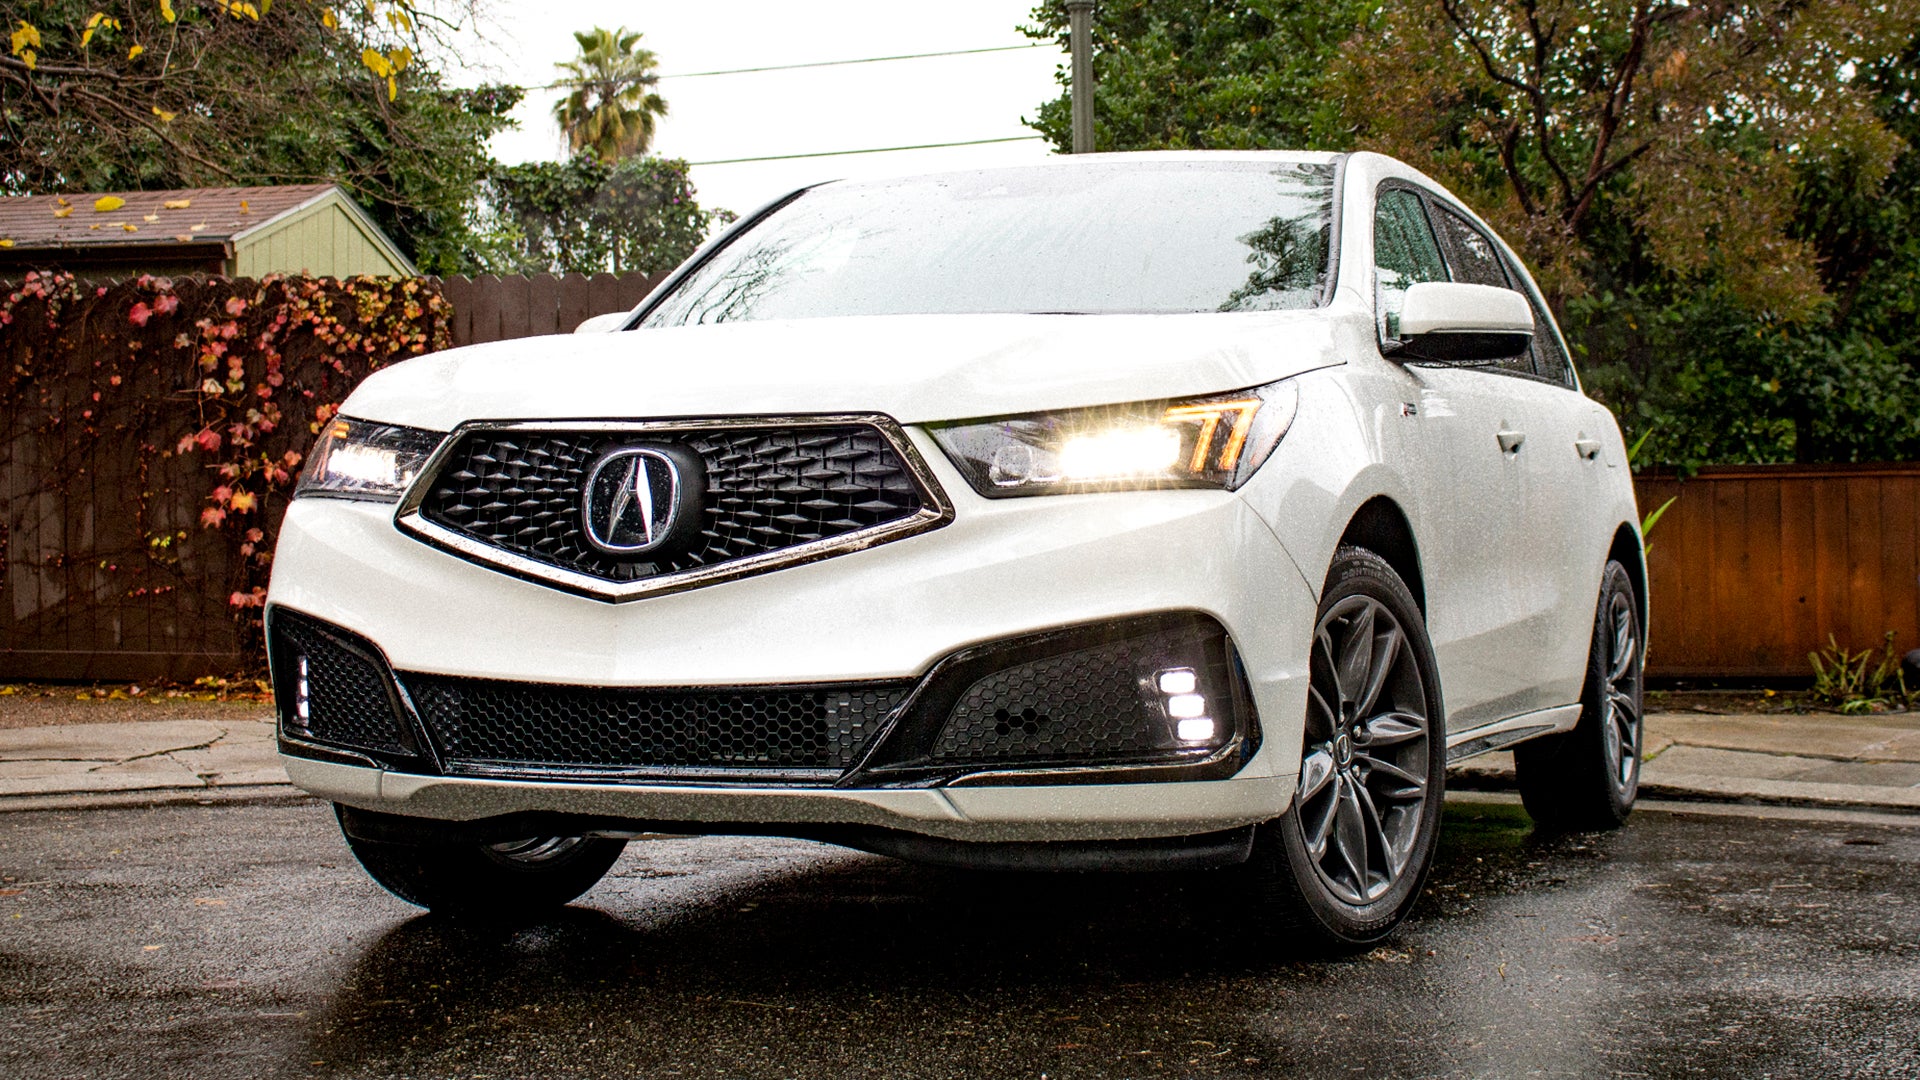 2019 Acura MDX A-Spec Review: A Nice Family Crossover, Pretending to Be  Sportier Than It Is